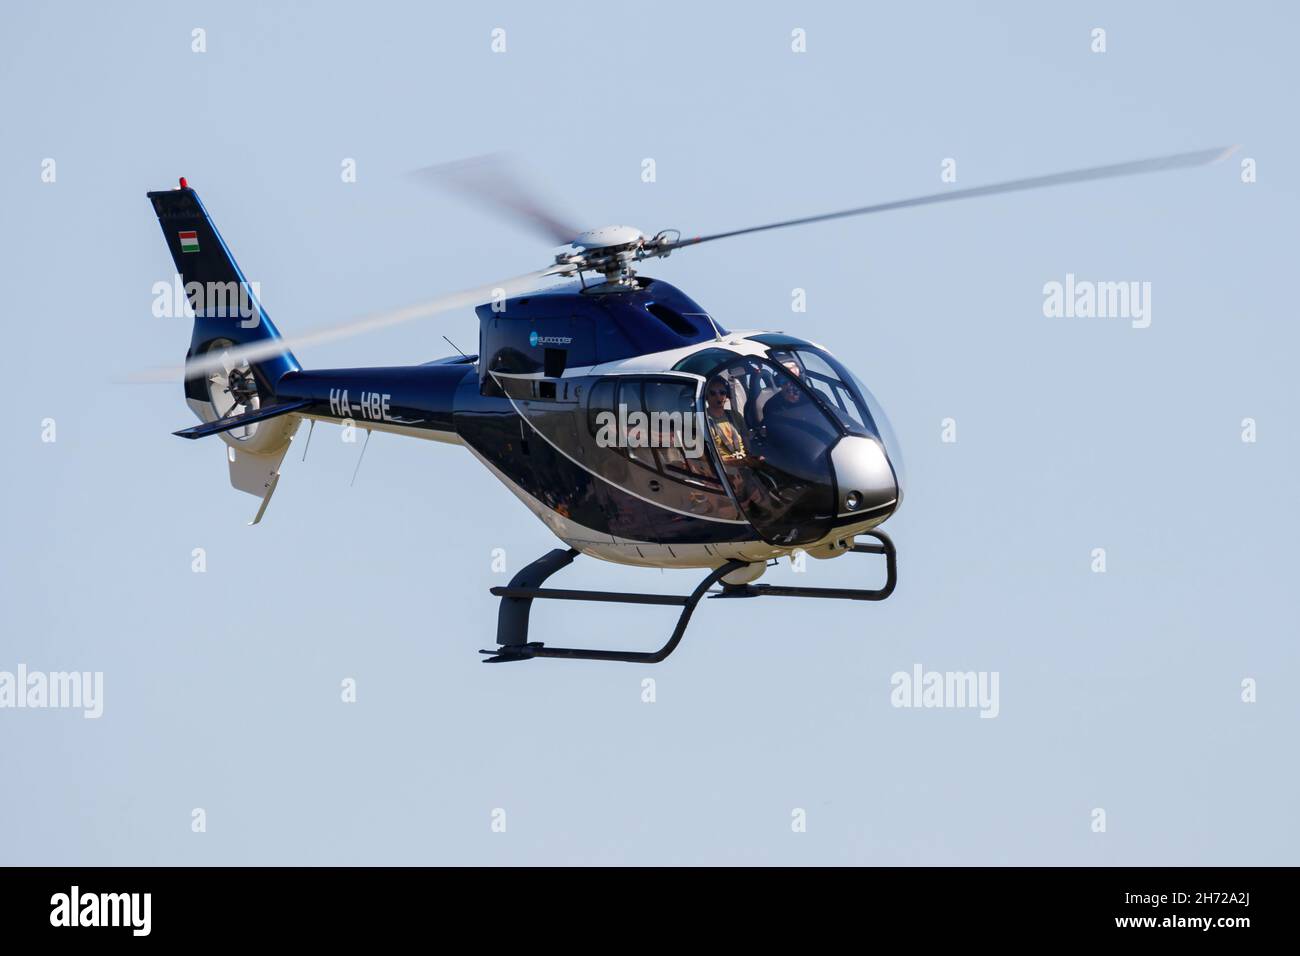 Kaposujlak, Hungary - June 5, 2021: Commercial helicopter at airport and airfield. Rotorcraft. General aviation industry. Civil utility transportation Stock Photo